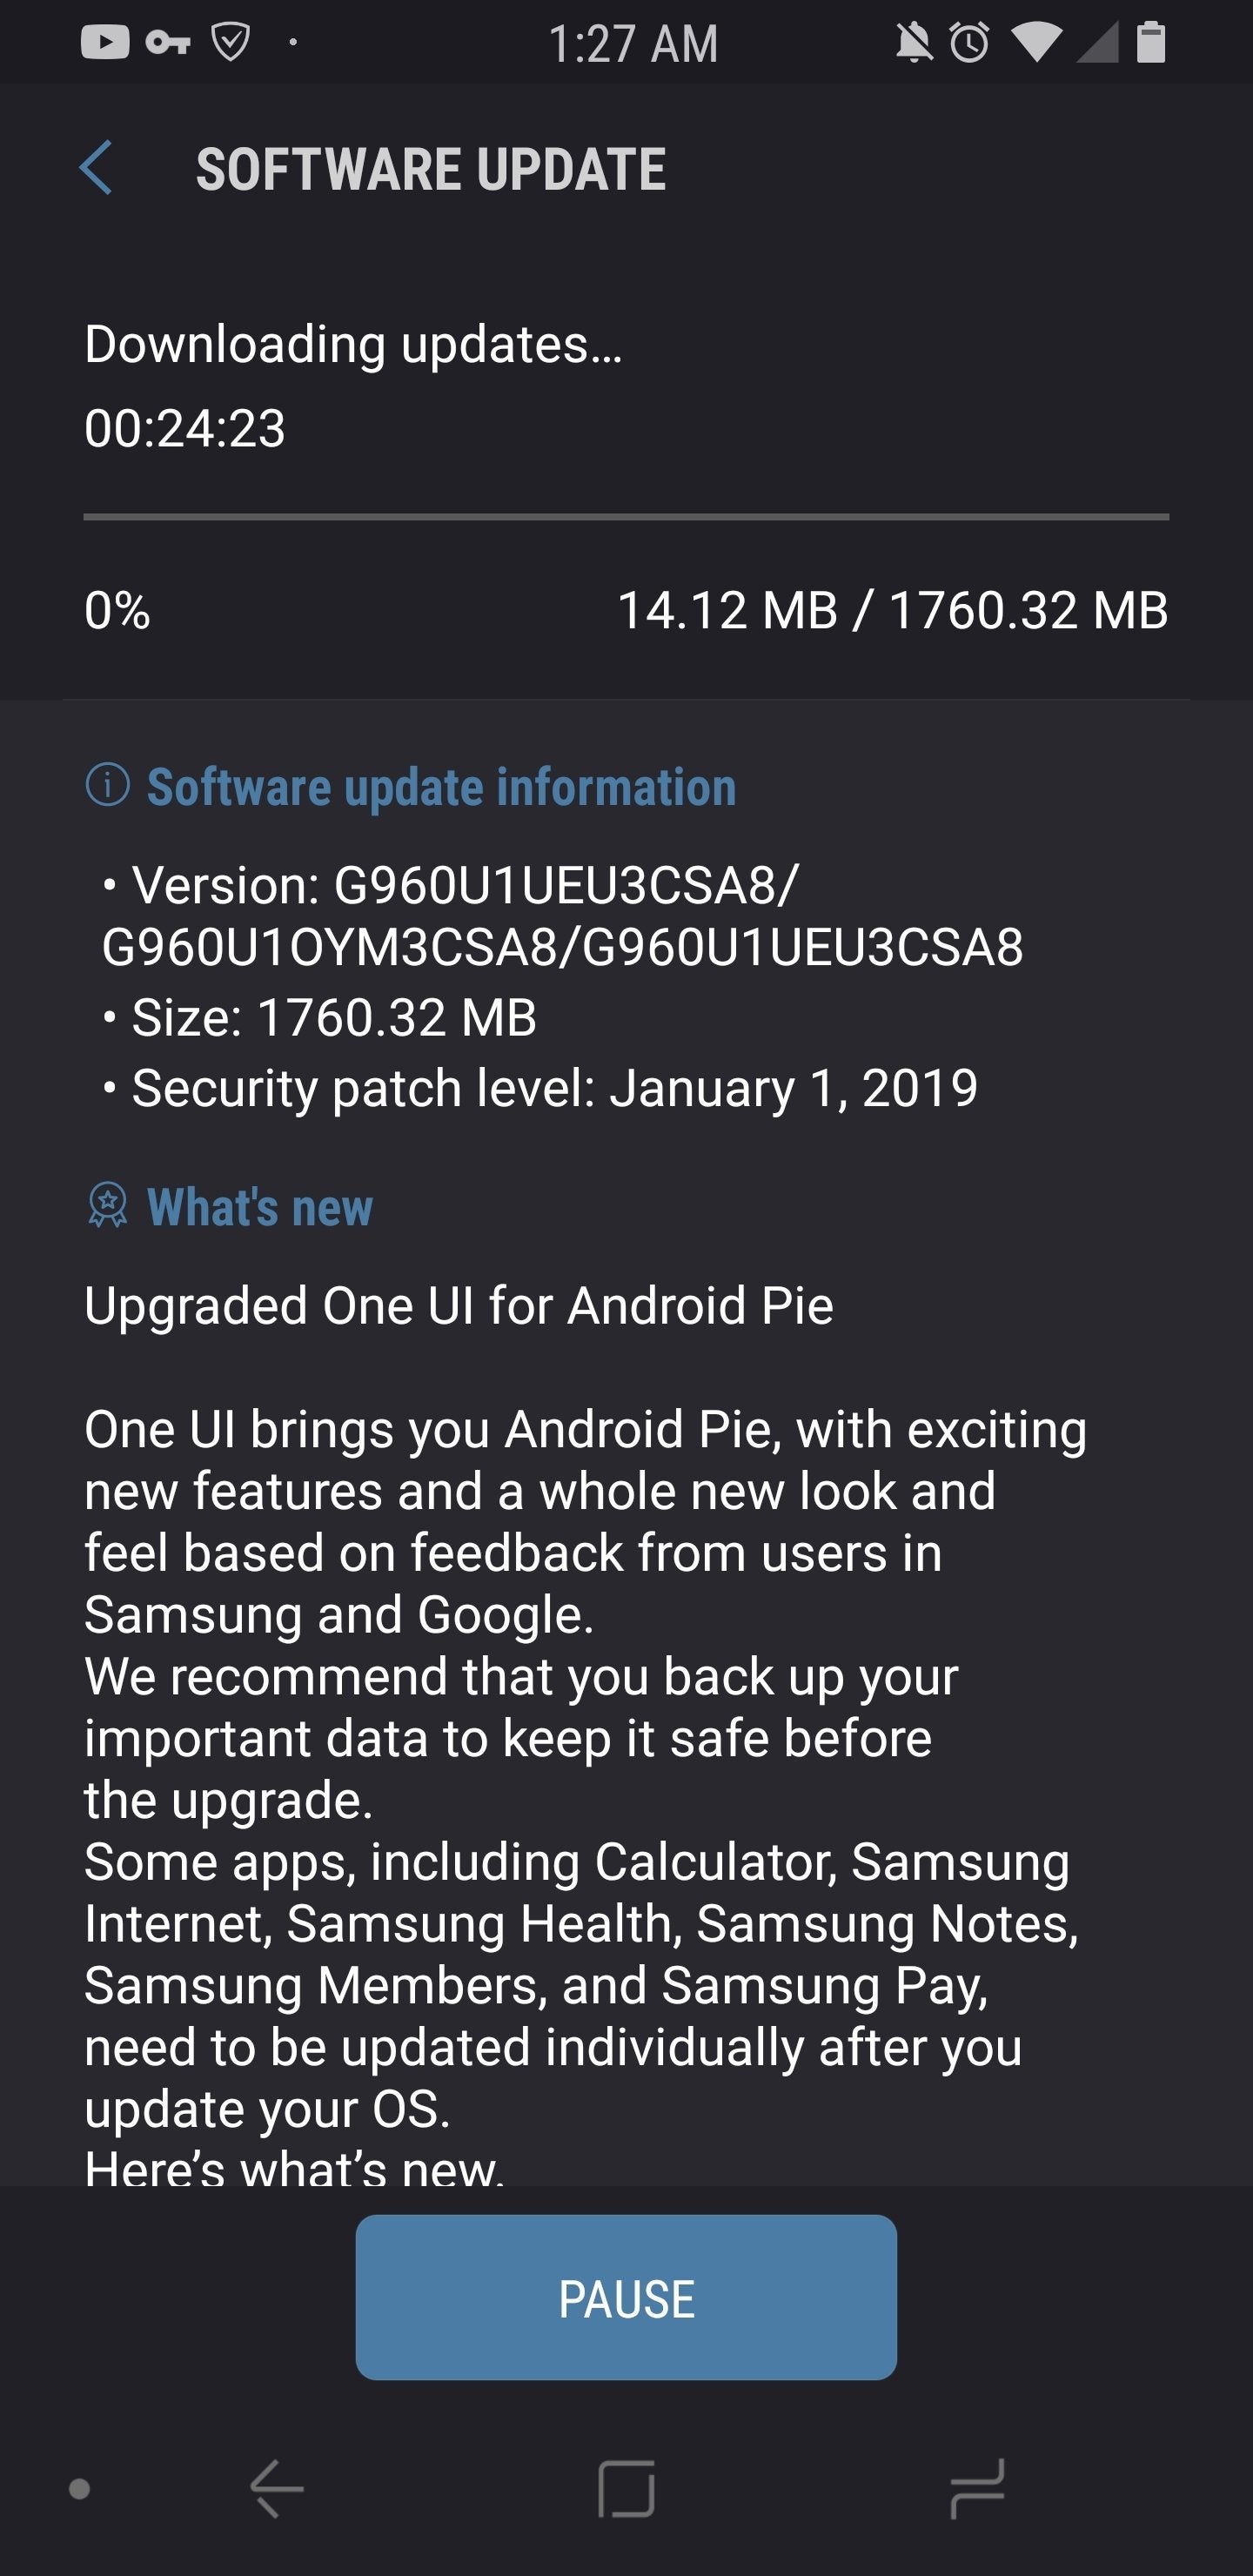 Unlocked Samsung Galaxy S9 starts receiving Android 9 Pie update in the U.S.